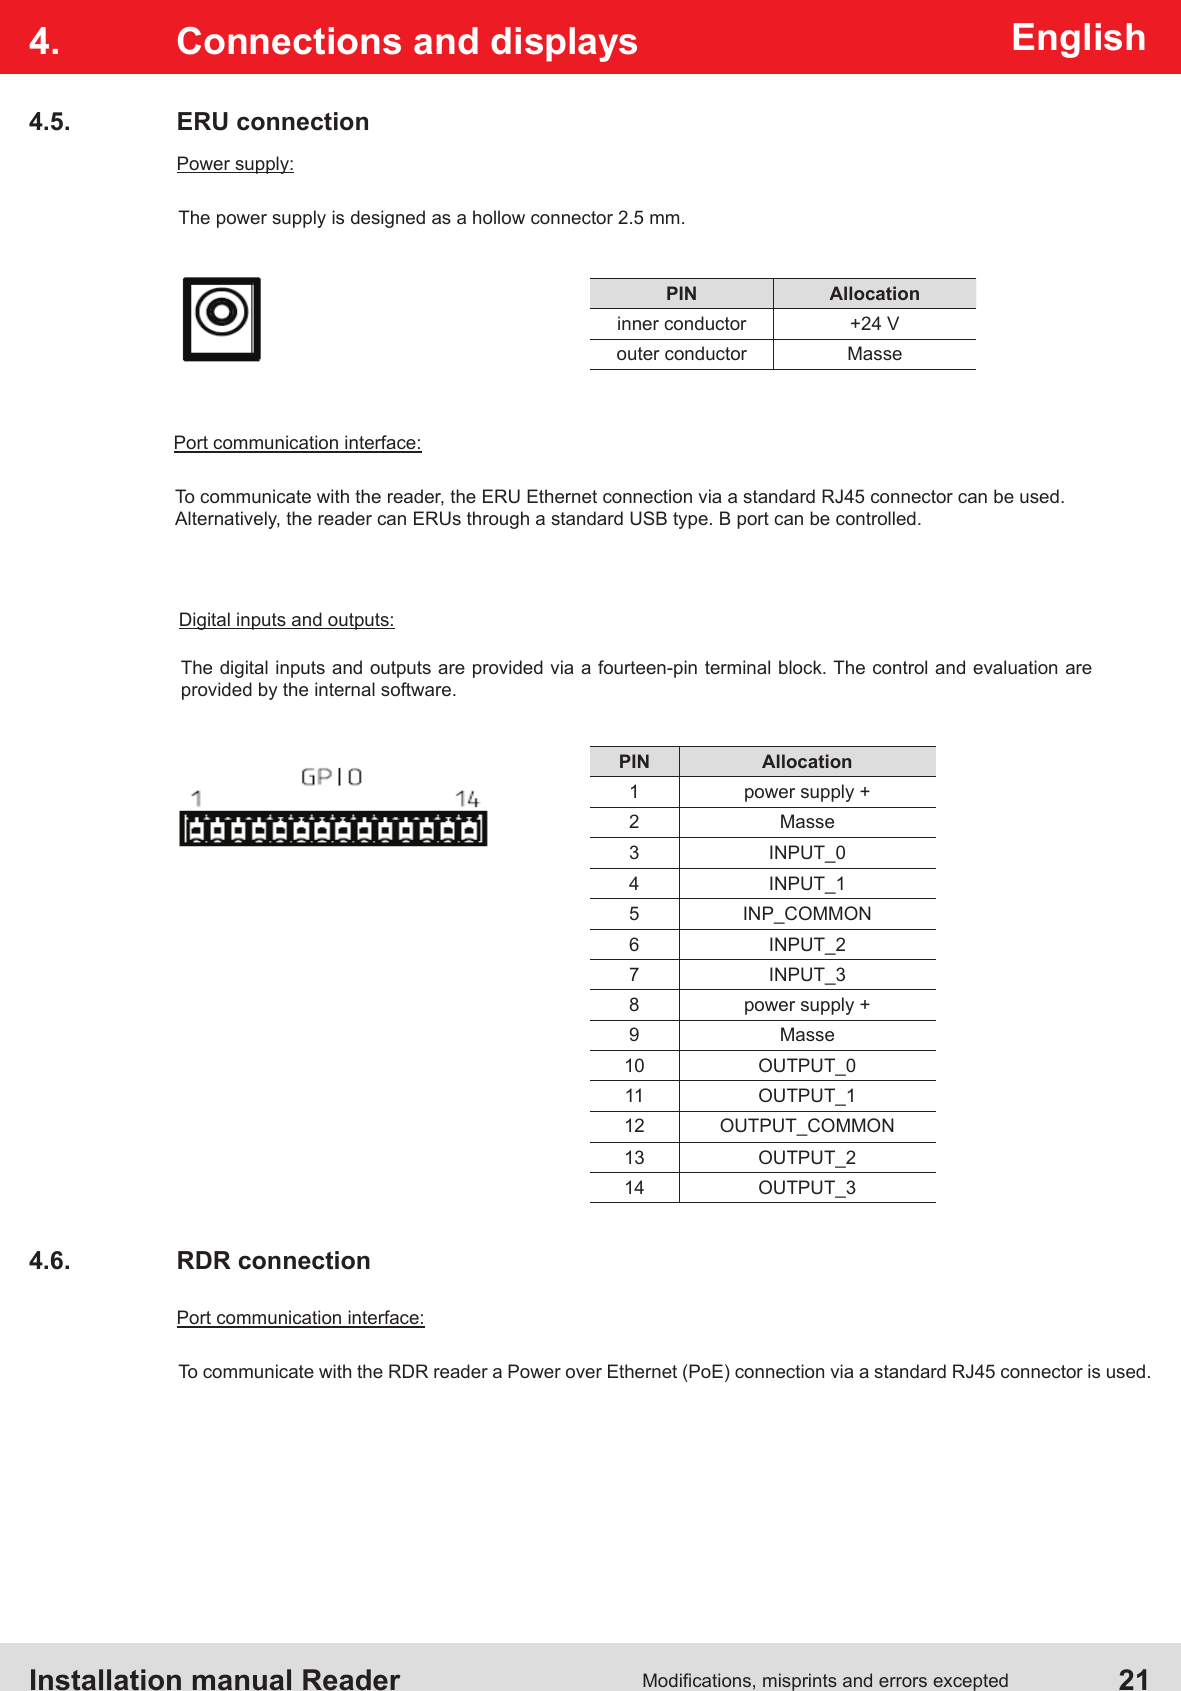 Installation manual Reader  21Modications, misprints and errors exceptedEnglish4.  Connections and displays4.5.  ERU connectionPIN Allocation1 power supply +2 Masse3 INPUT_04 INPUT_15 INP_COMMON6 INPUT_27 INPUT_38 power supply +9 Masse10 OUTPUT_011 OUTPUT_112 OUTPUT_COMMON13 OUTPUT_214 OUTPUT_3Power supply:The power supply is designed as a hollow connector 2.5 mm.Digital inputs and outputs:The digital inputs and outputs are provided via a fourteen-pin terminal block. The control and evaluation are provided by the internal software.Port communication interface:To communicate with the reader, the ERU Ethernet connection via a standard RJ45 connector can be used.Alternatively, the reader can ERUs through a standard USB type. B port can be controlled.4.6.  RDR connectionPort communication interface:To communicate with the RDR reader a Power over Ethernet (PoE) connection via a standard RJ45 connector is used.PIN Allocationinner conductor +24 Vouter conductor Masse